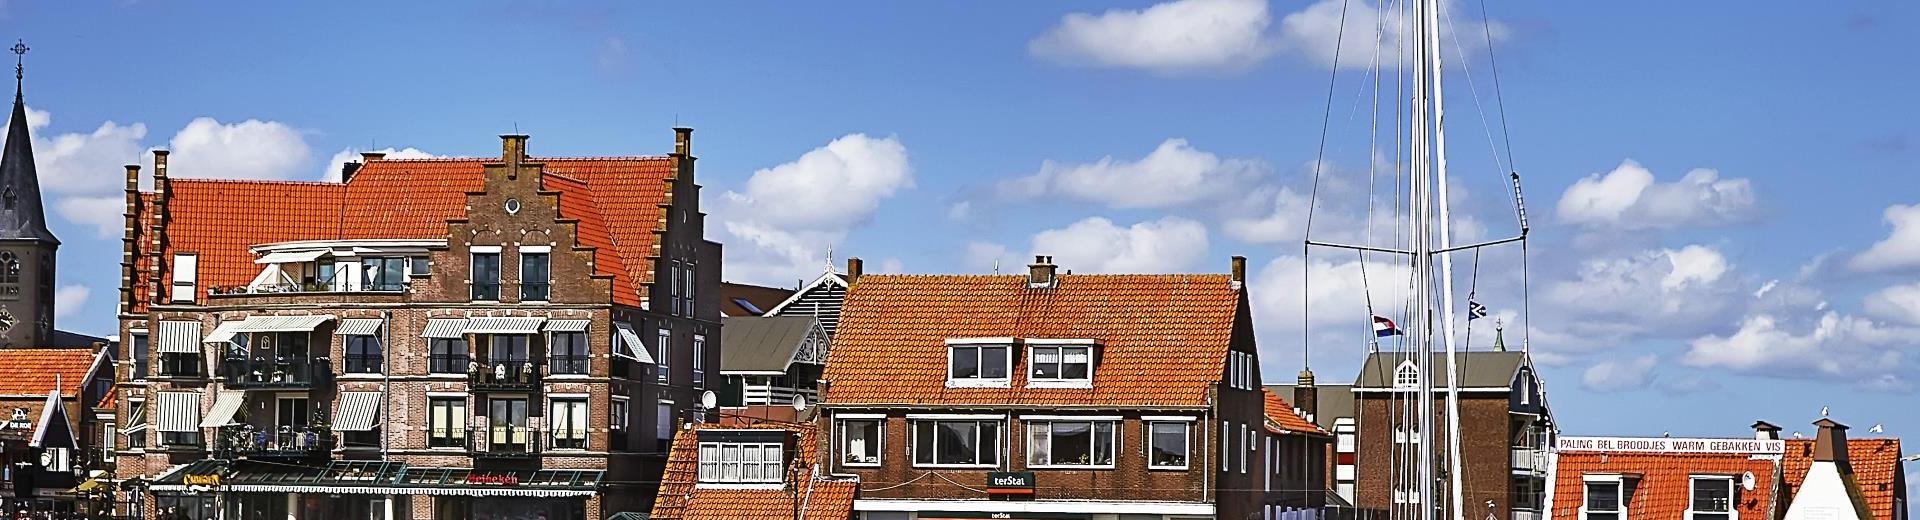 Find the perfect vacation home Friesland - Casamundo